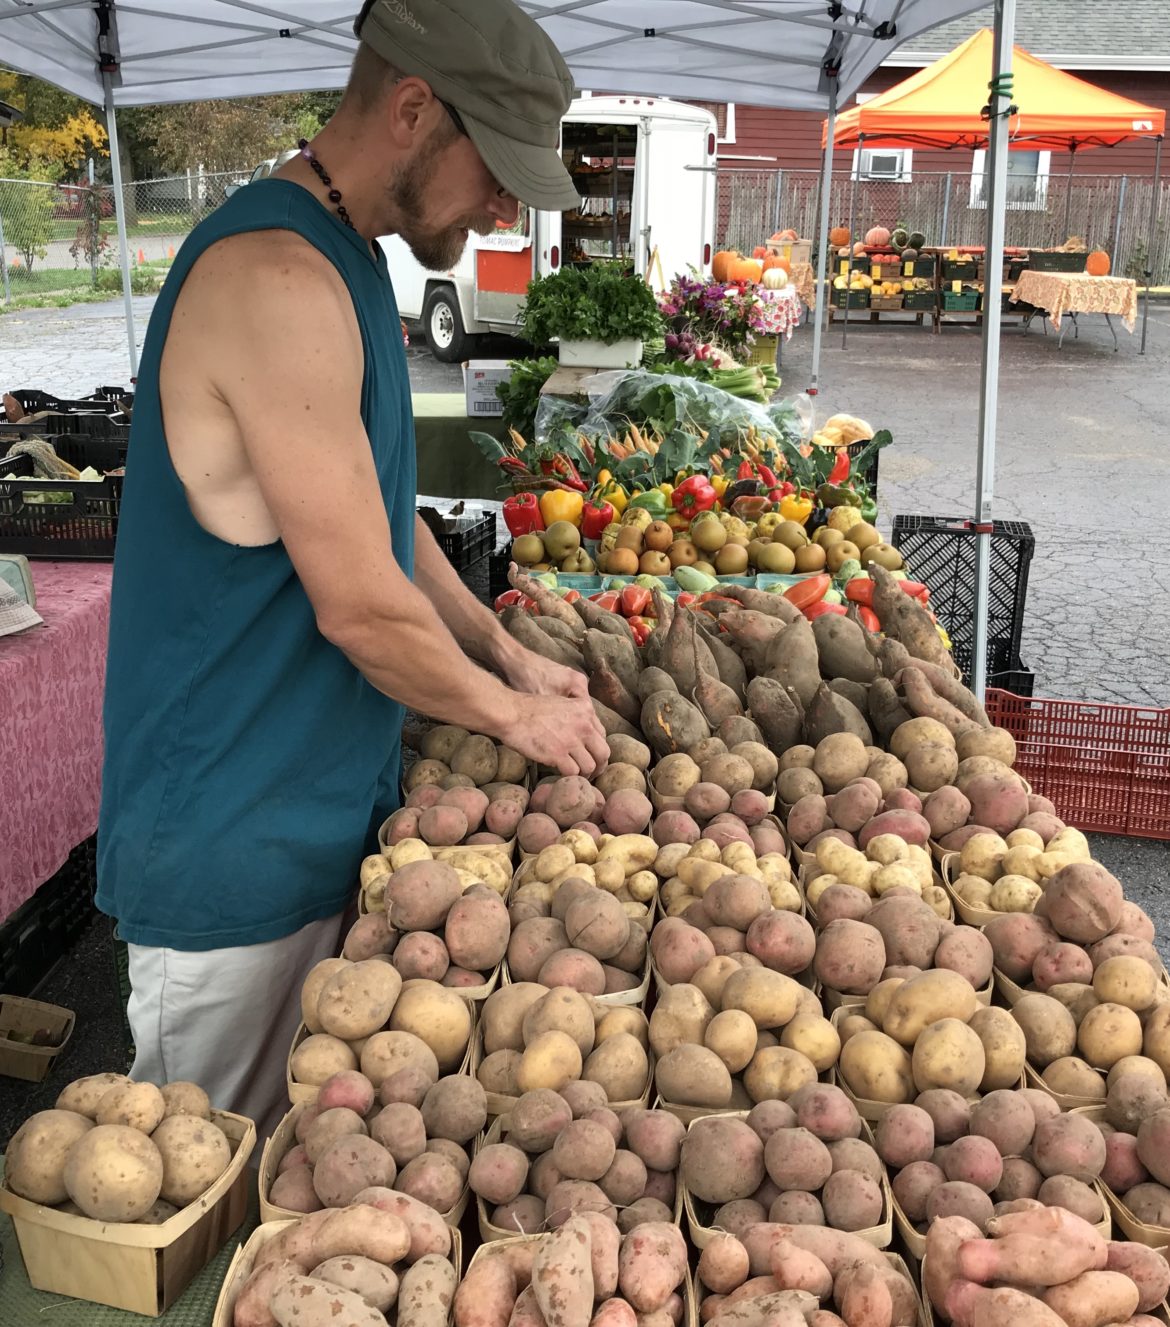 Peter Keay works on Green Eagle Farm, one of the vendors who sells produce and other products at the Allen Farmers Market. “Our display really seems like a museum of different varieties of fruits and vegetables — some I have never seen before,” Keay said. “It’s really a wonderful world of discovery at Green Eagle Farms.”